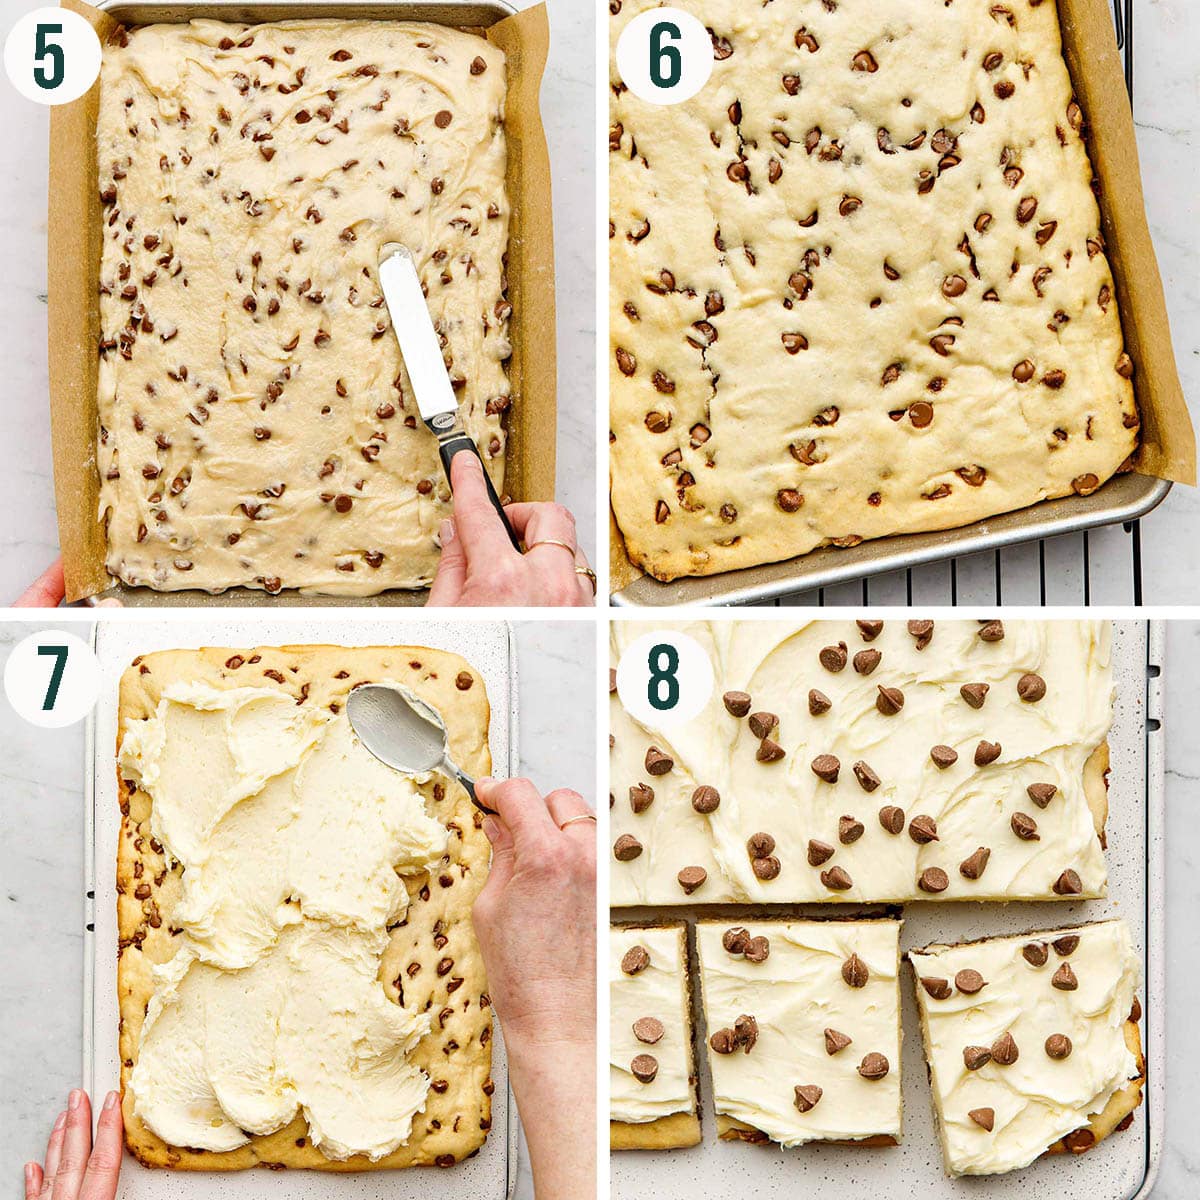 Sheet cake steps 5 to 8, cake before and after baking, and frosted.